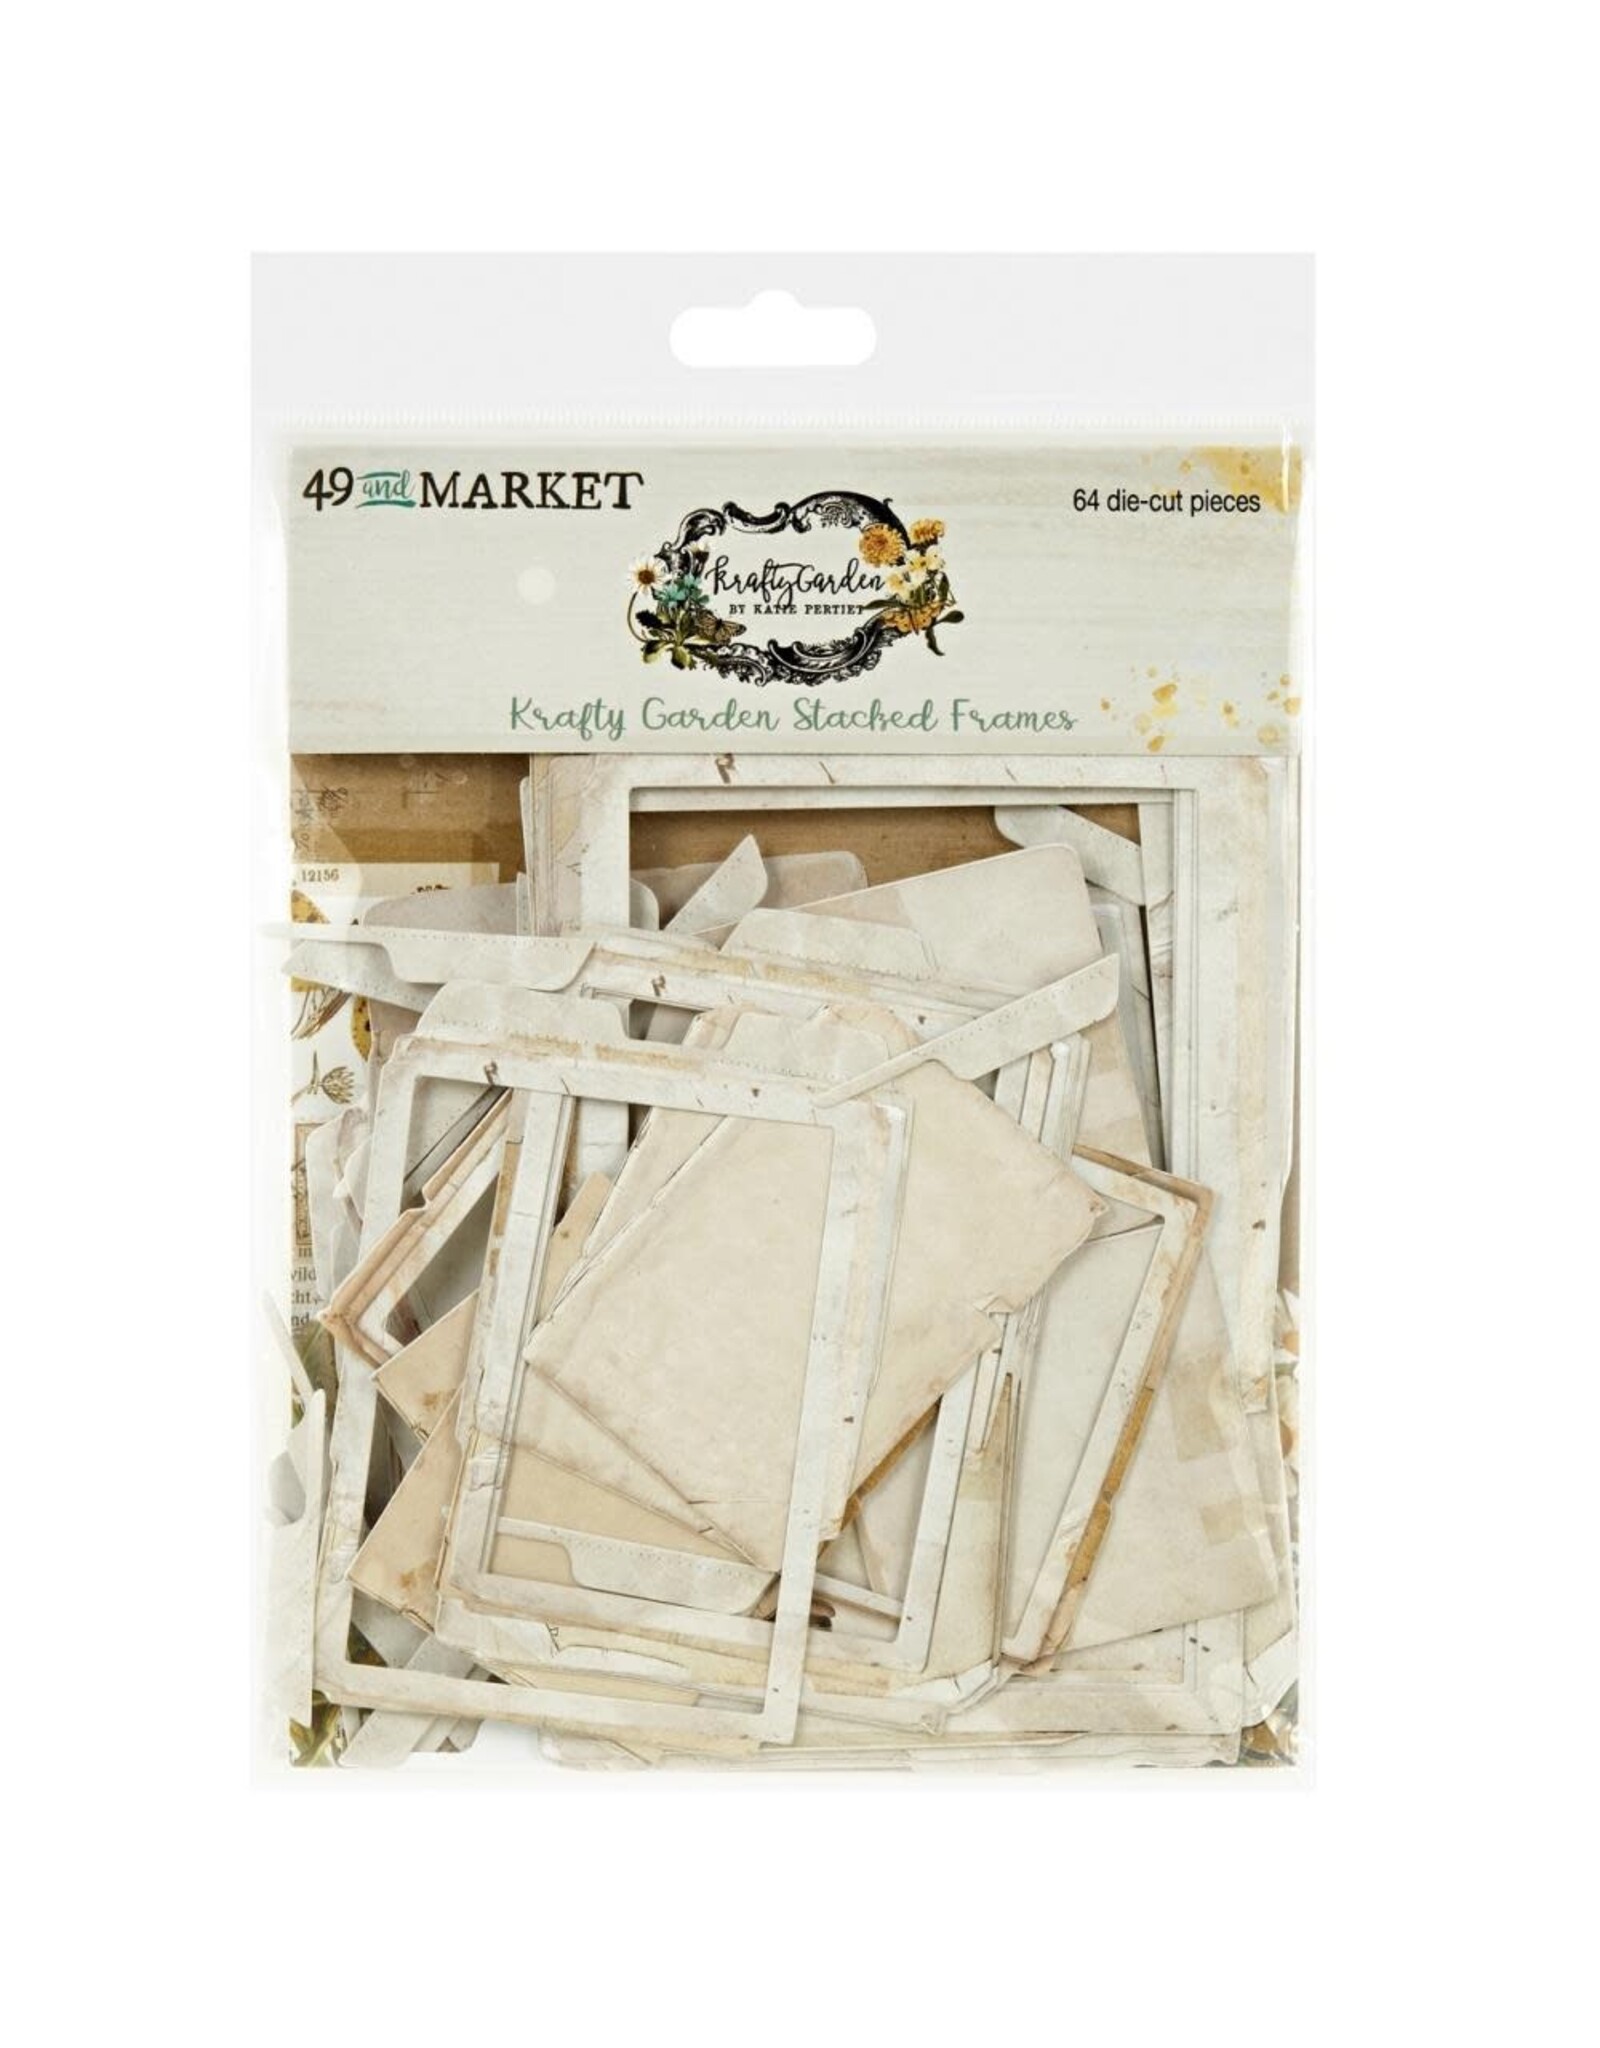 49 AND MARKET 49 AND MARKET KRAFTY GARDEN STACKED FRAMES 64 PIECES